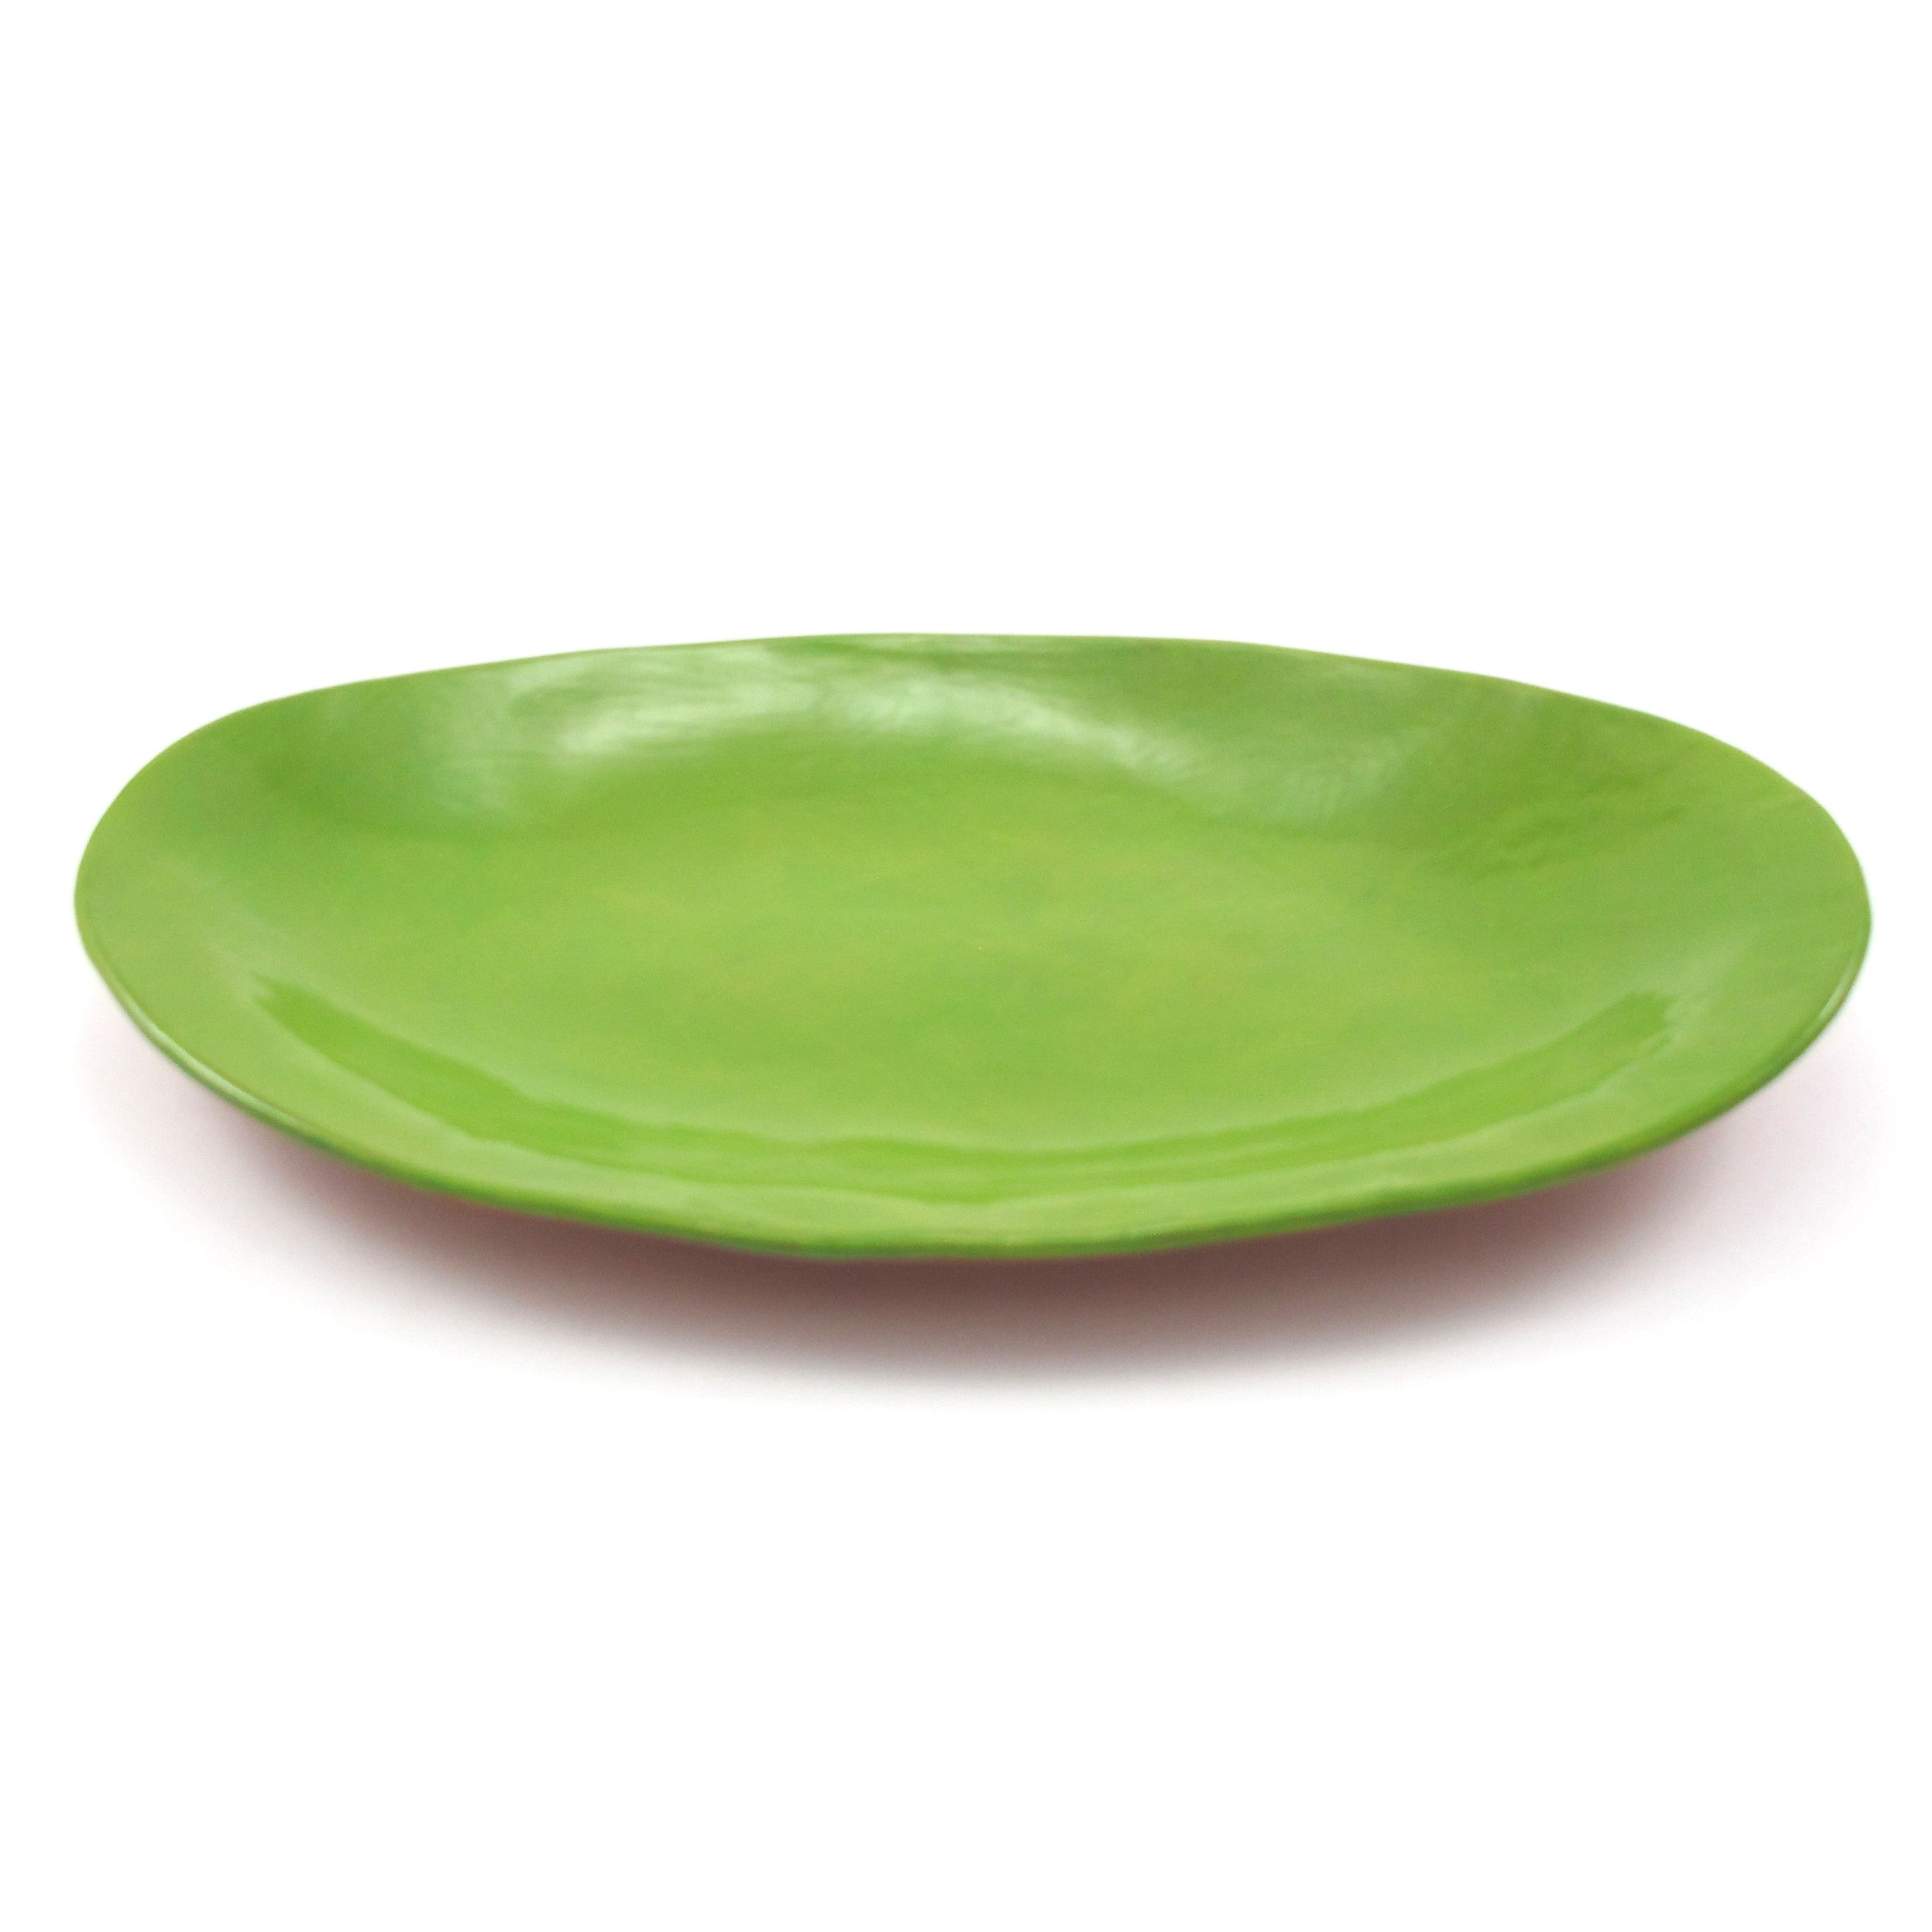 Oval Platter | First quality